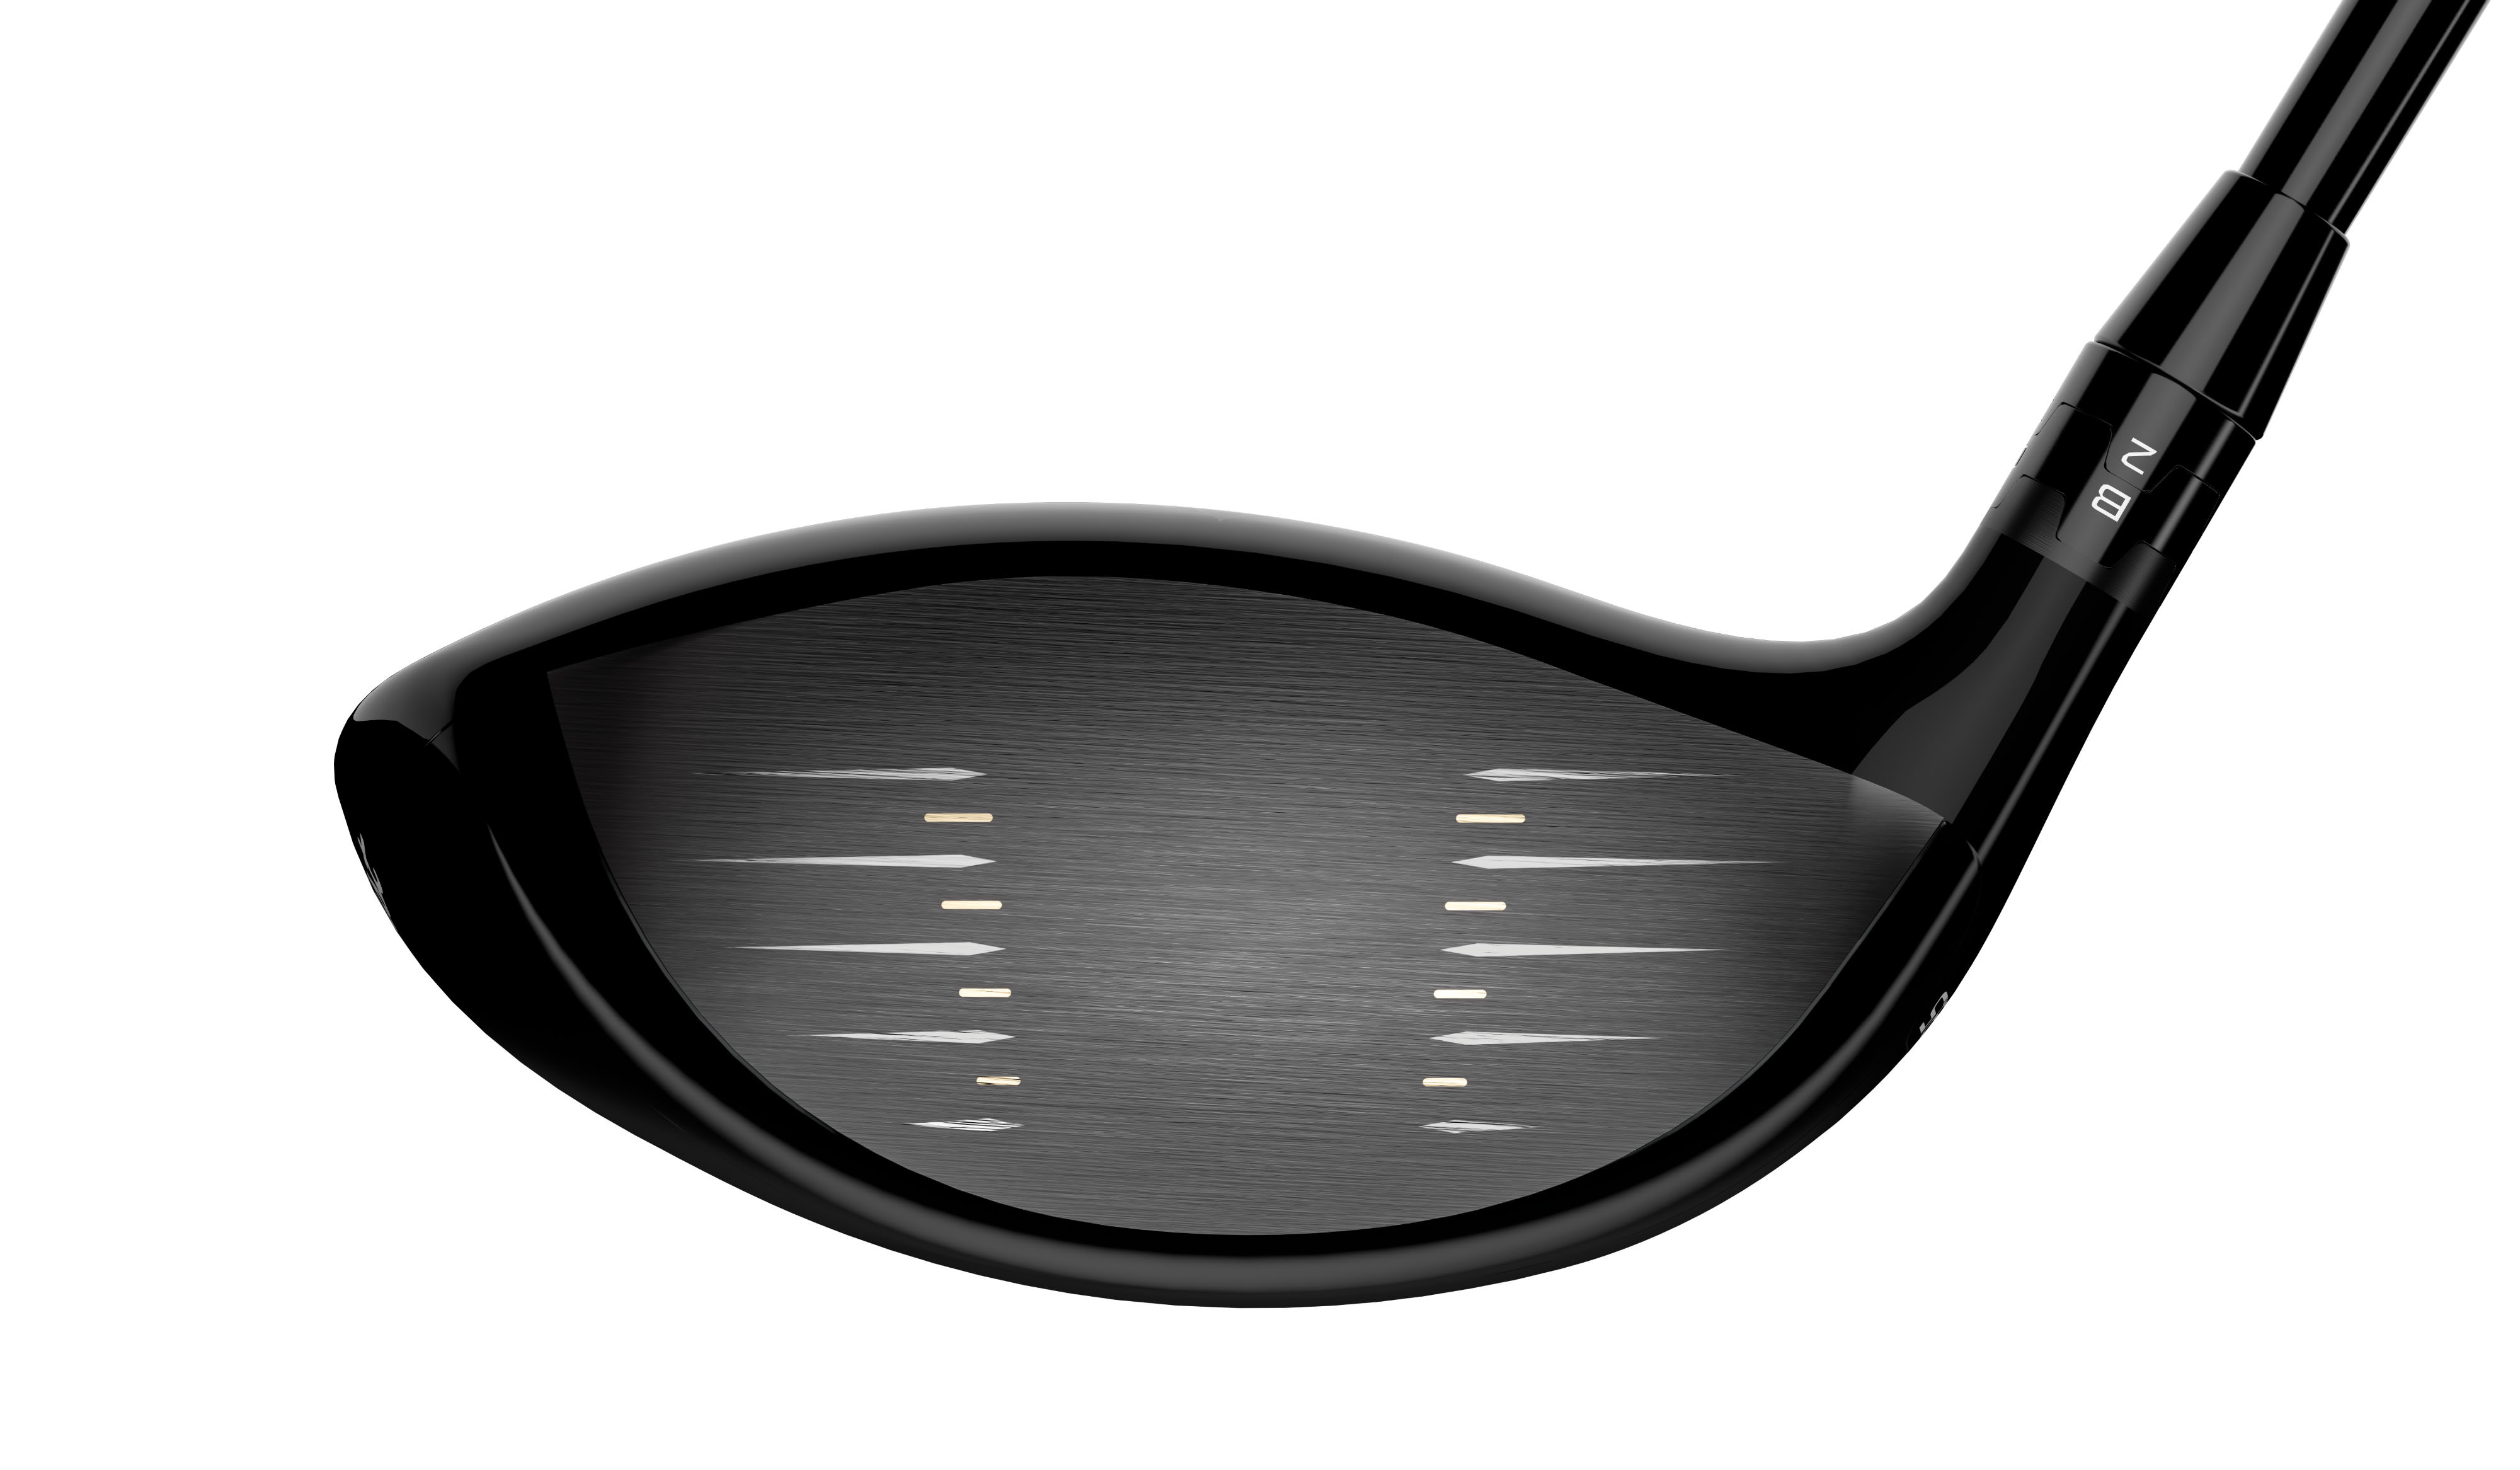 Titleist TS1 driver review